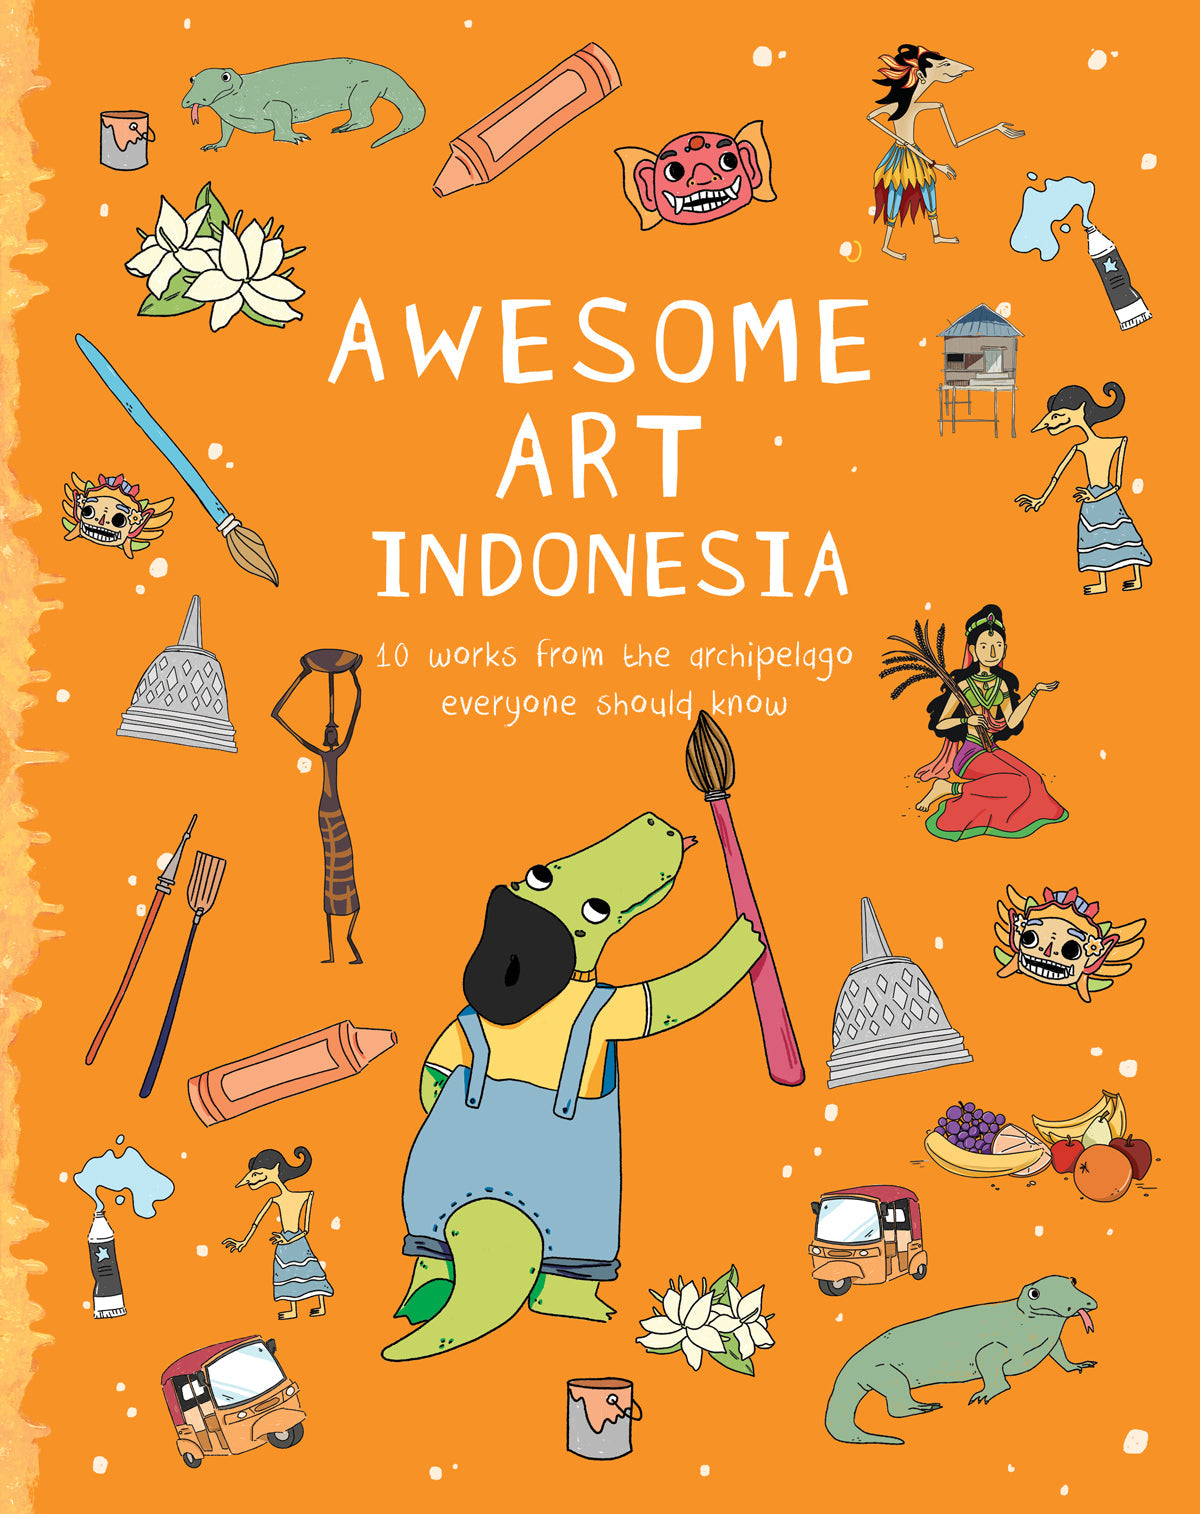 AWESOME ART INDONESIA: 10 WORKS FROM THE ARCHIPELAGO EVERYONE SHOULD KNOW